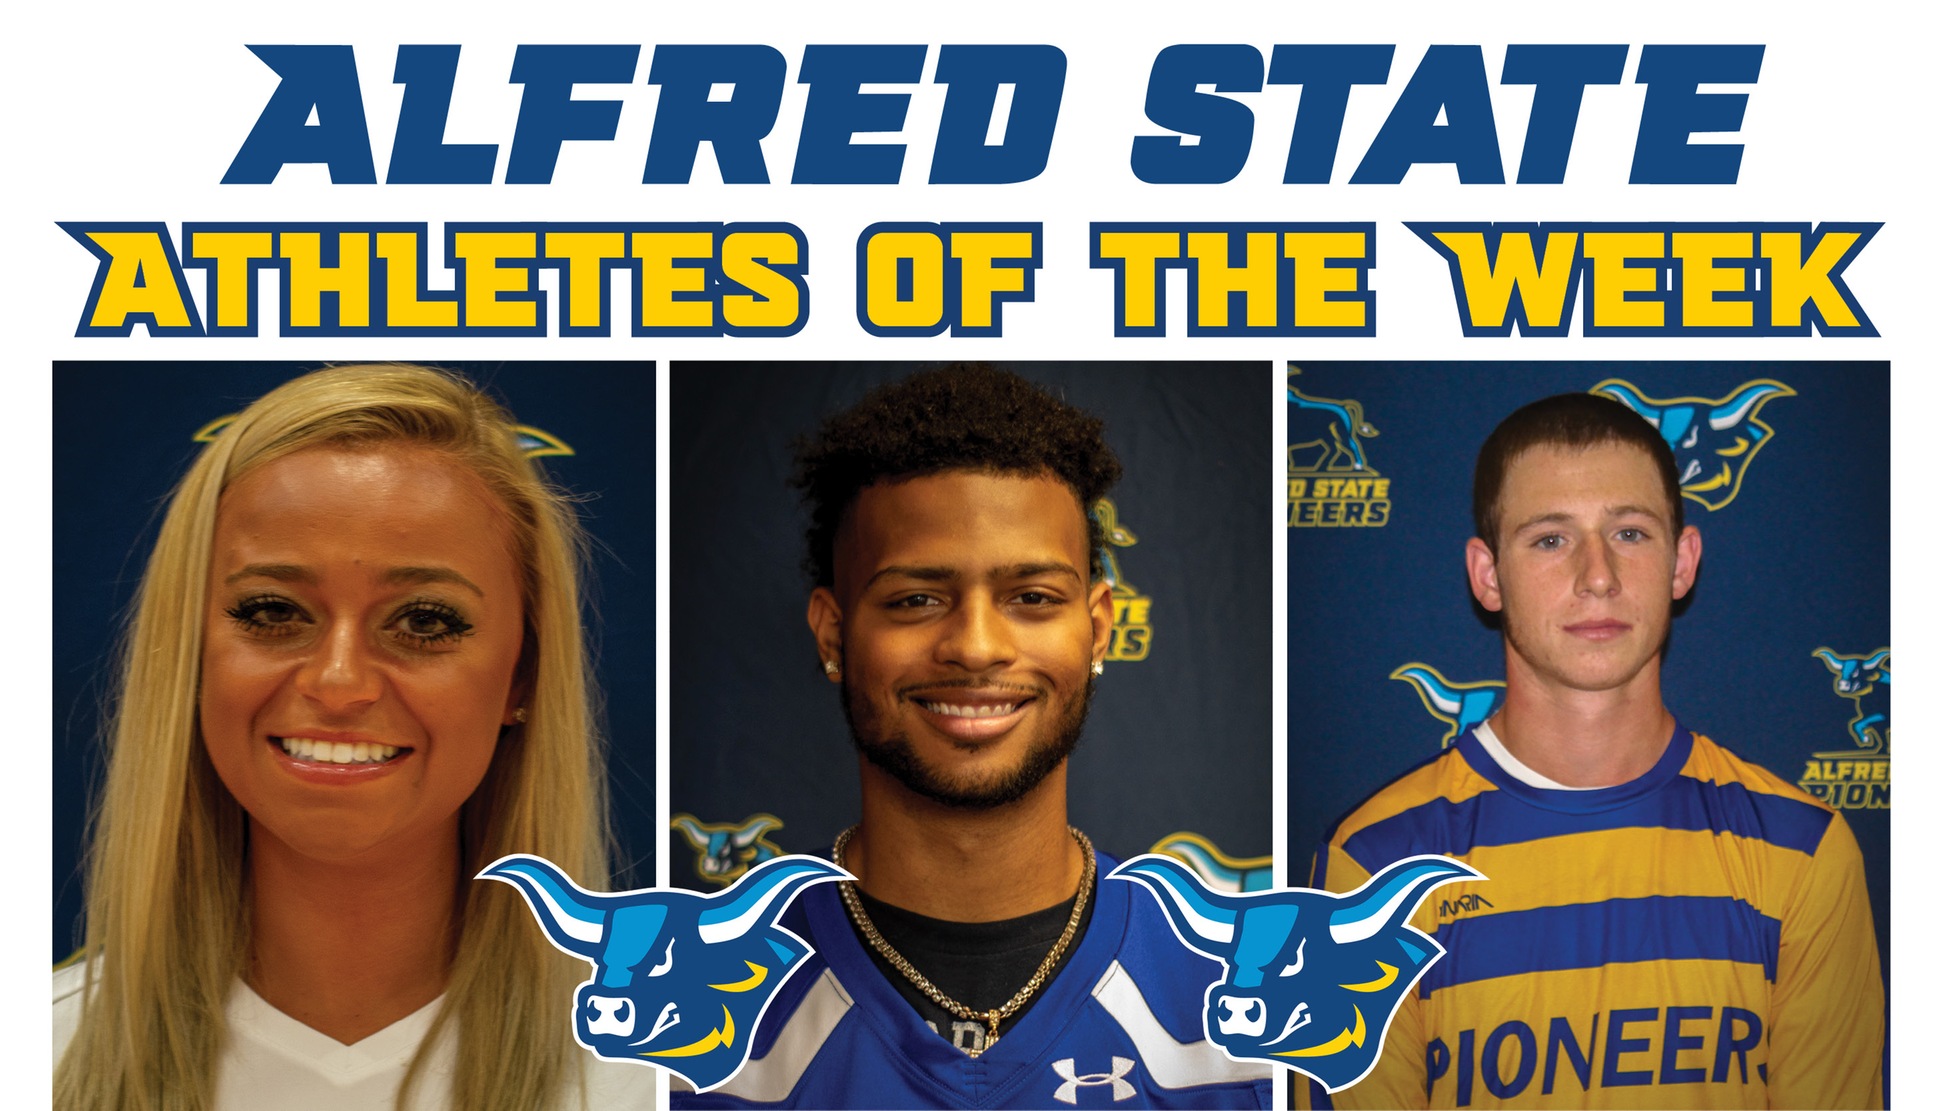 Michayla Salatel, Jalen Long, and Just Hoffmann named Alfred State Athletes of the Week